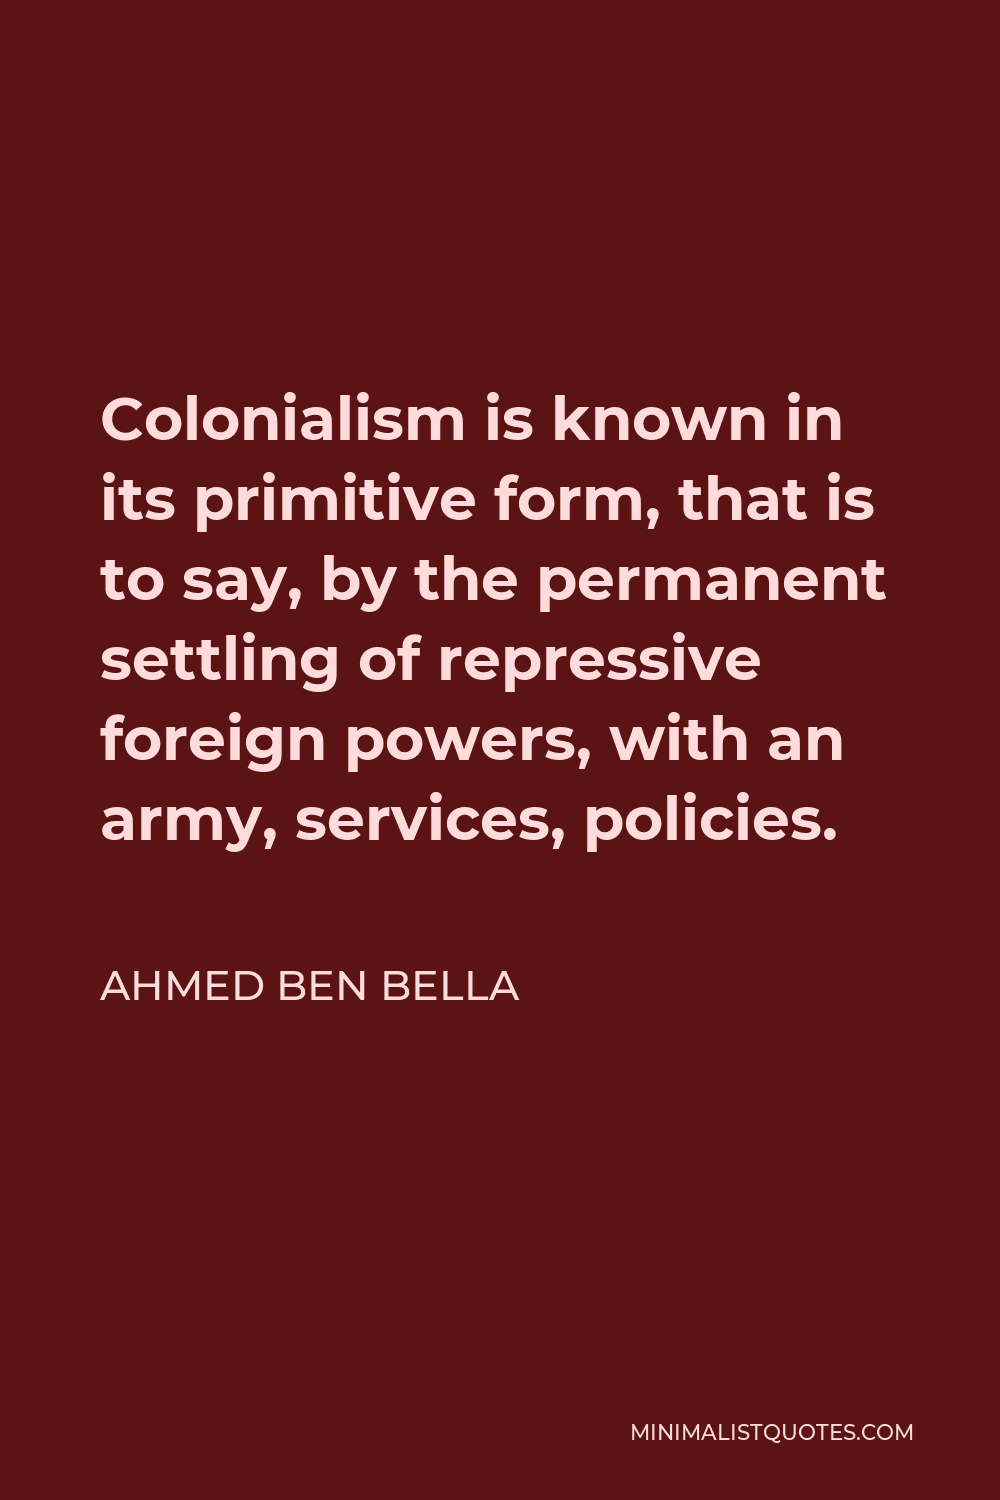 Ahmed Ben Bella Quote - Colonialism is known in its primitive form, that is to say, by the permanent settling of repressive foreign powers, with an army, services, policies.